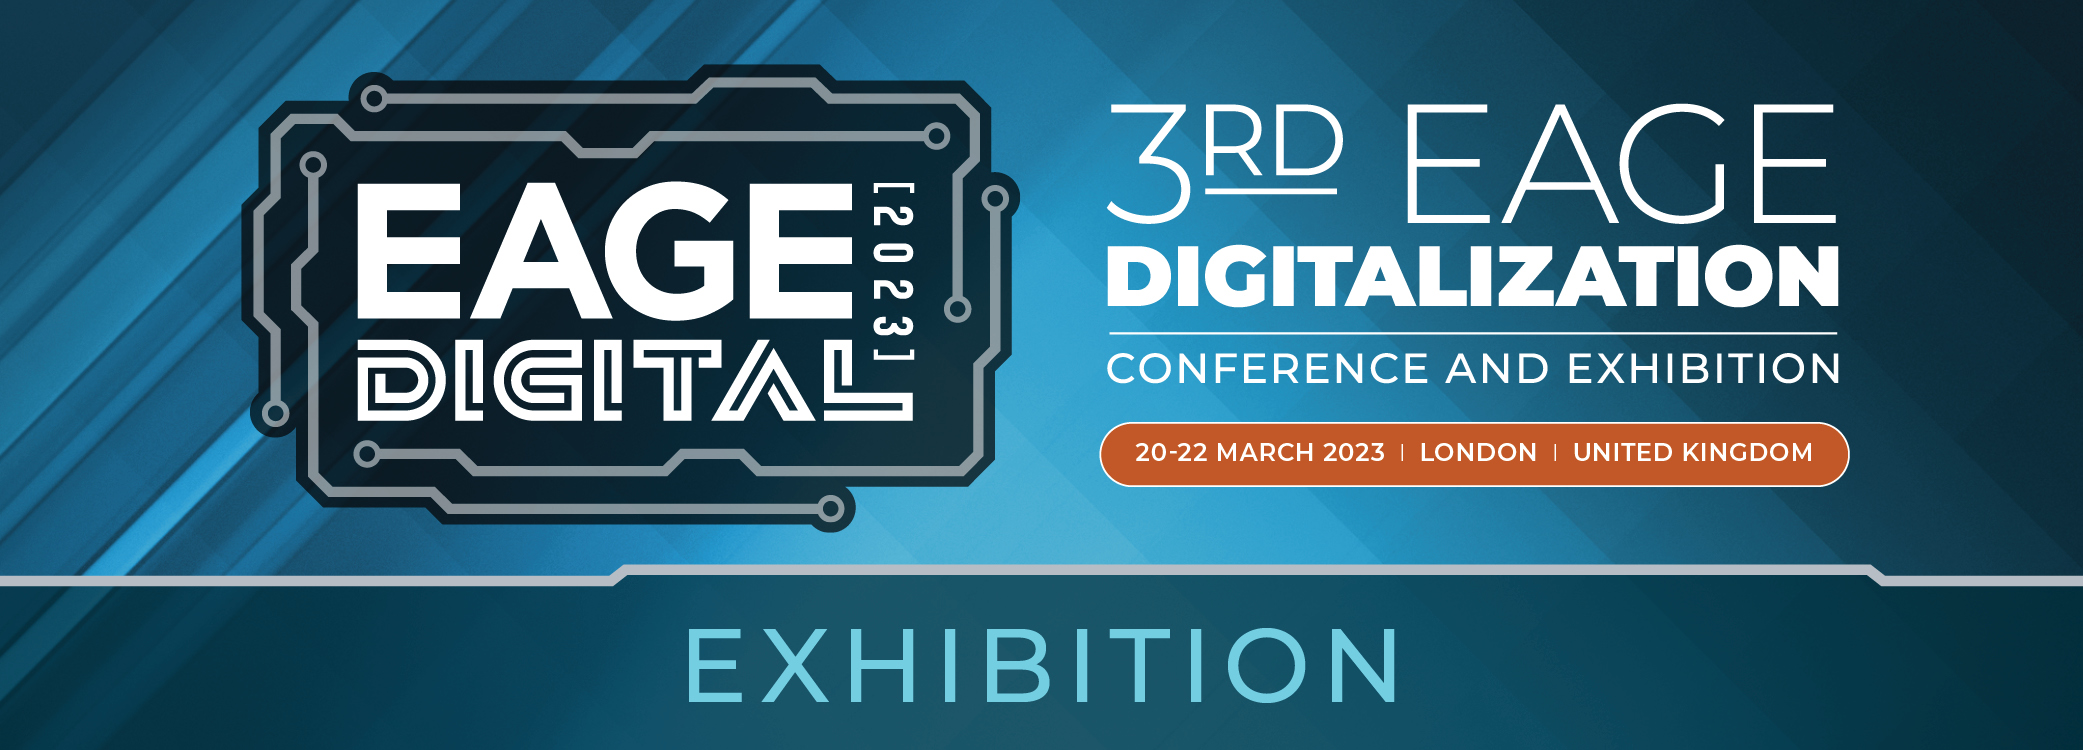 EAGE Digitalization Conference and Exhibition 2023